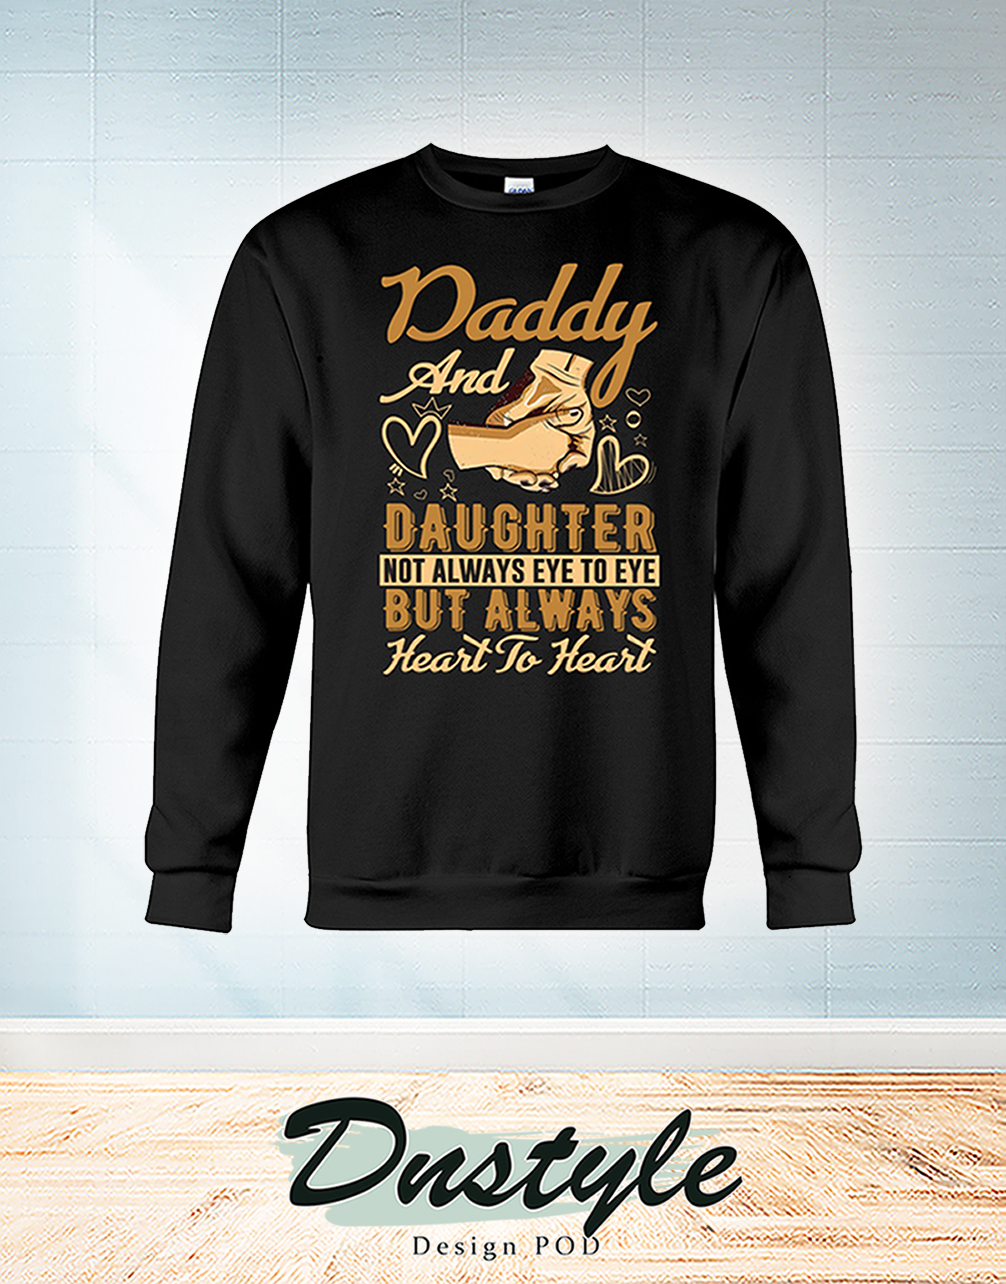 Holding hands Daddy and daughter not alway eye to eye but alway heart to heart sweatshirt